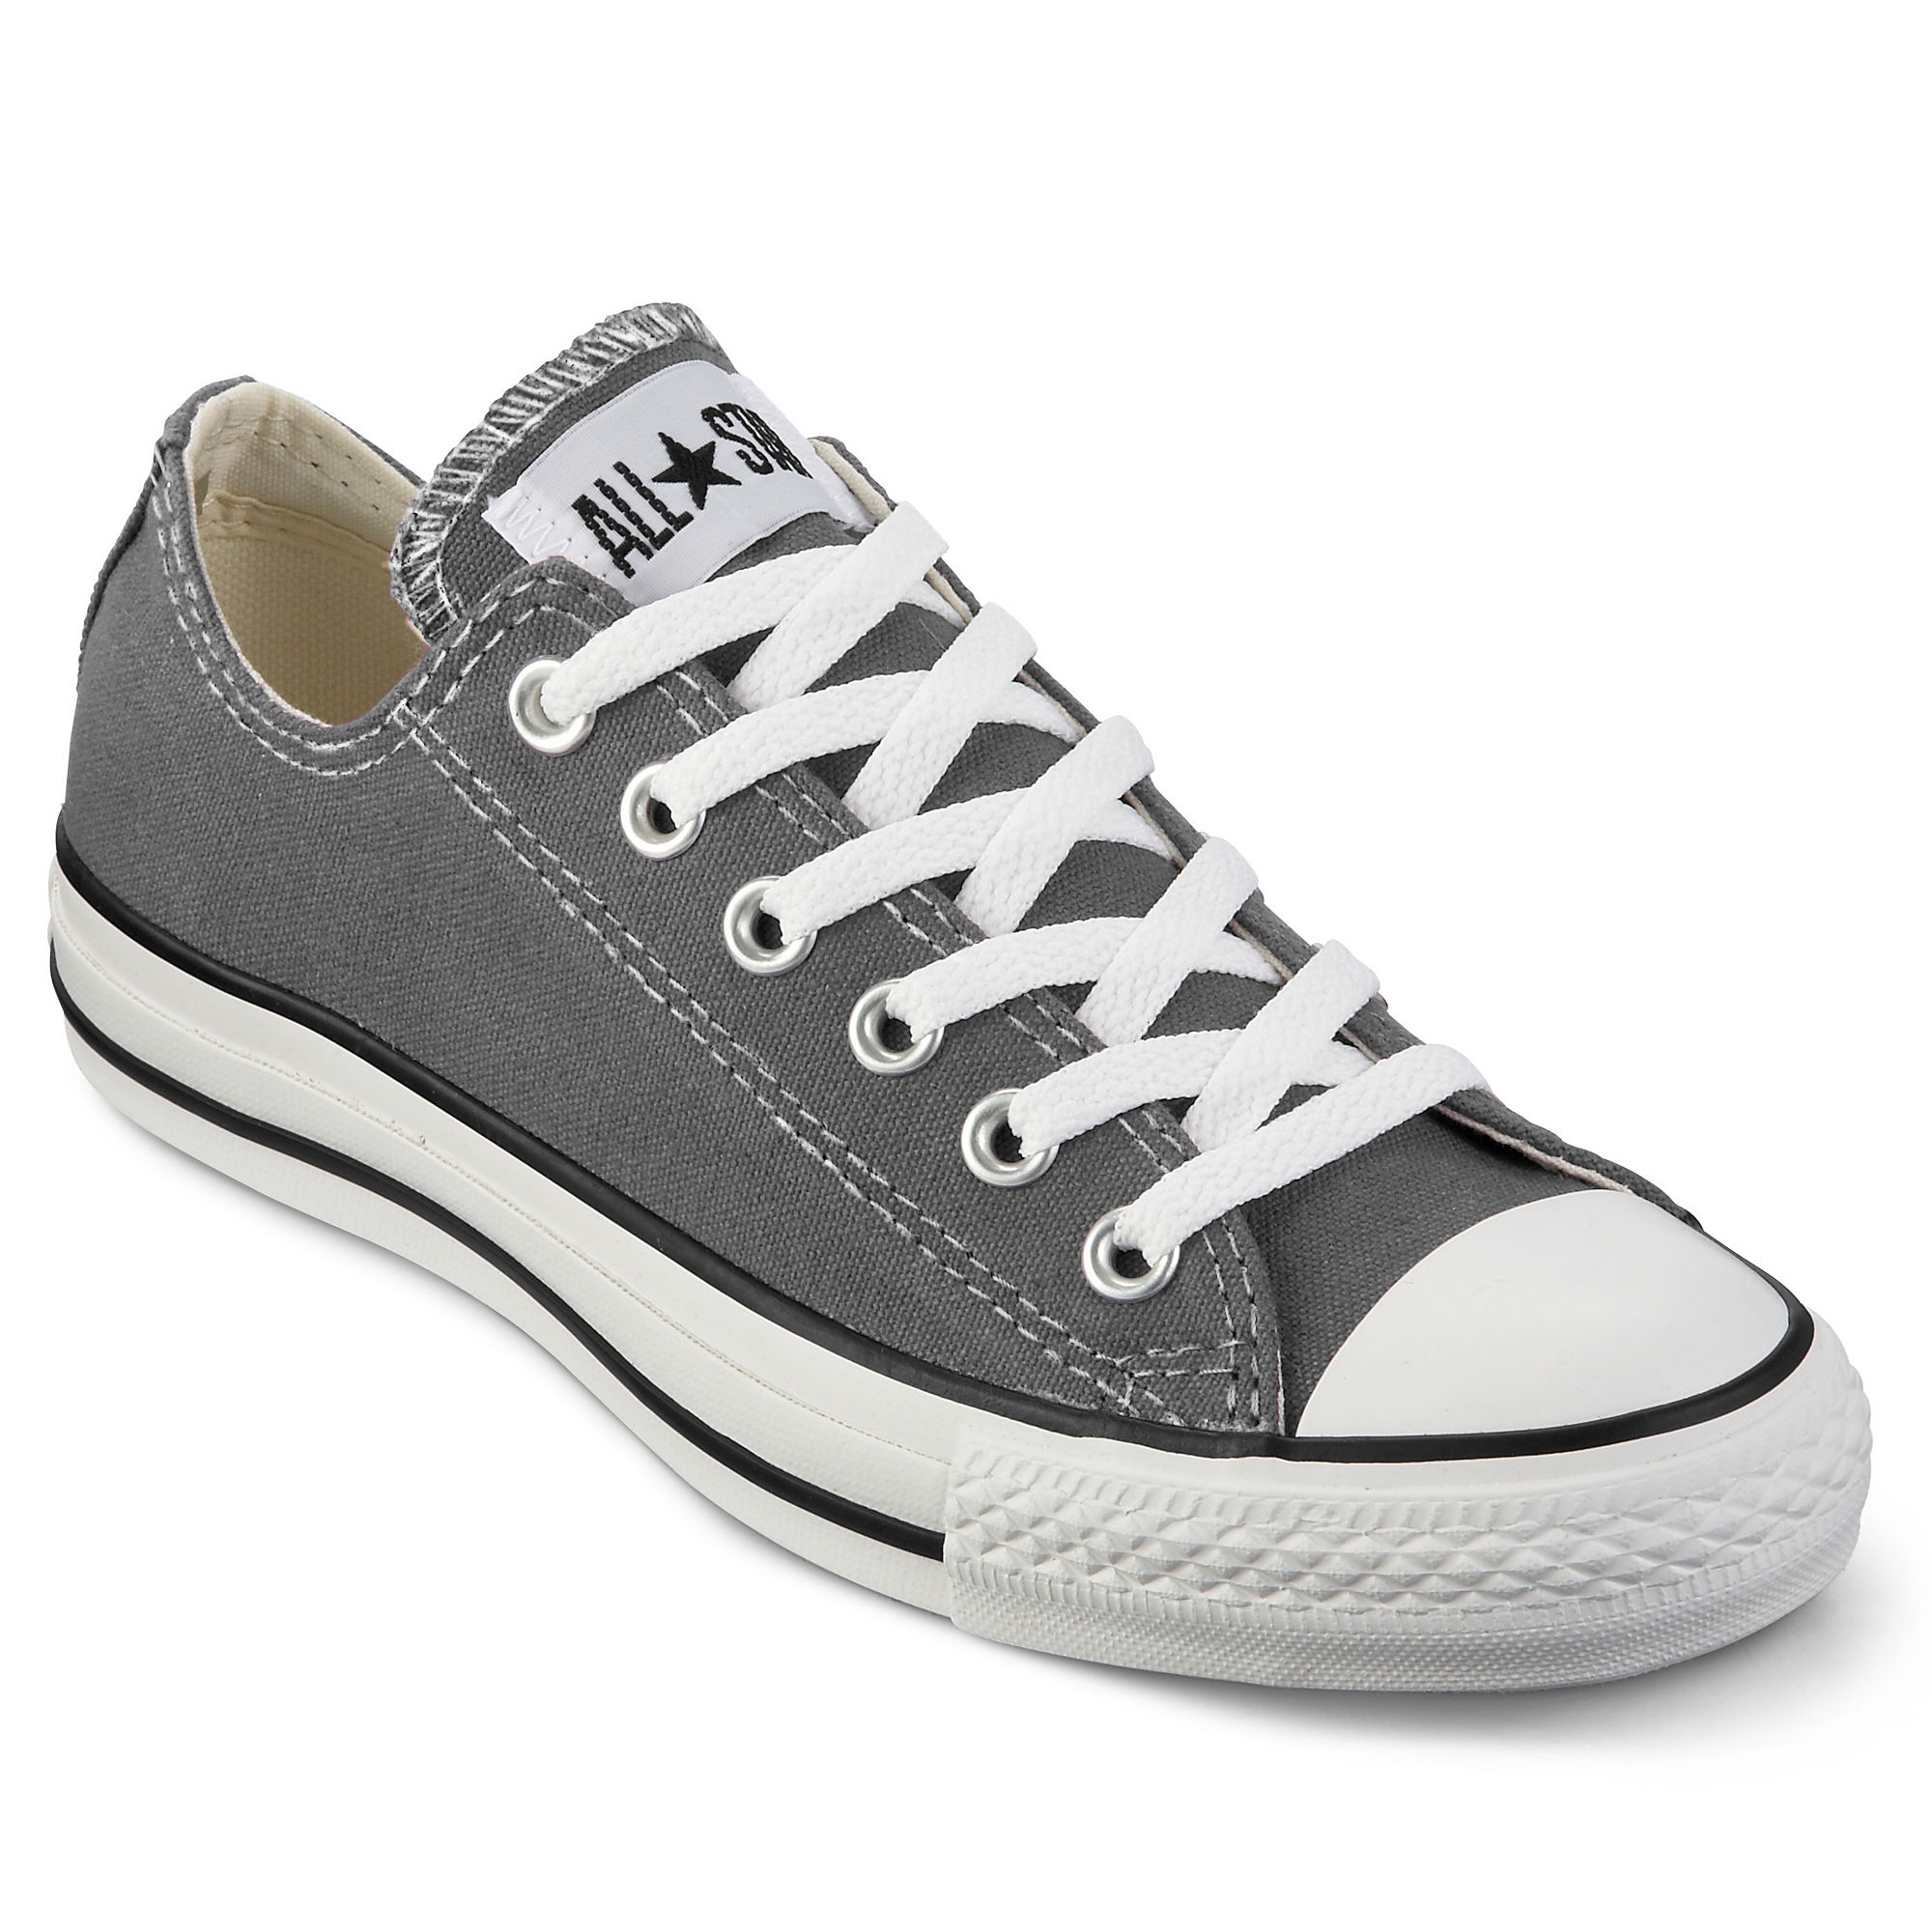 UPC 022859975780 product image for Converse Chuck Taylor All Star Sneakers - Unisex Sizing | upcitemdb.com